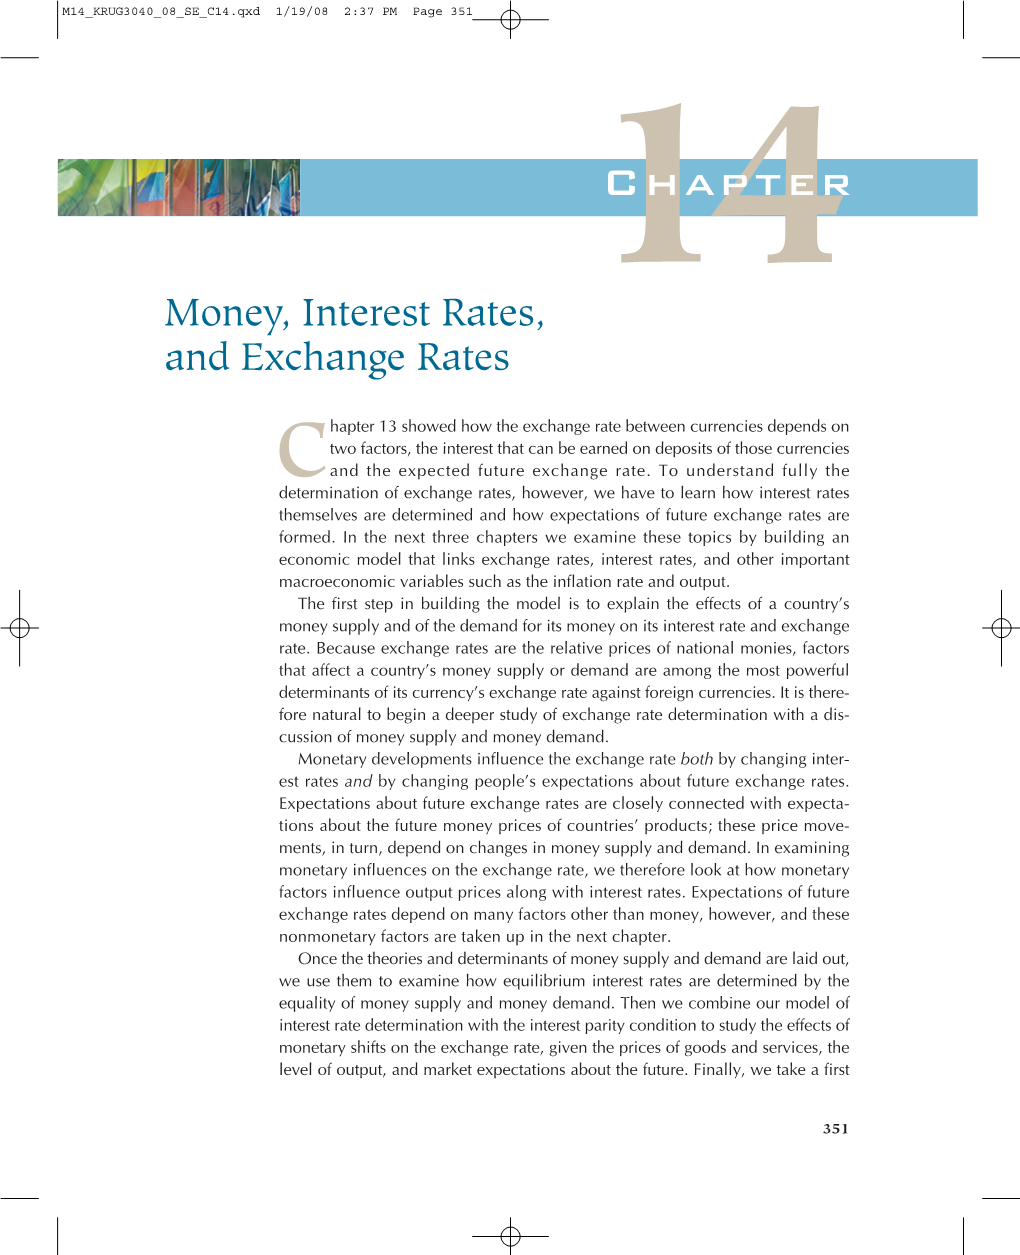 14Chapter Money, Interest Rates, and Exchange Rates